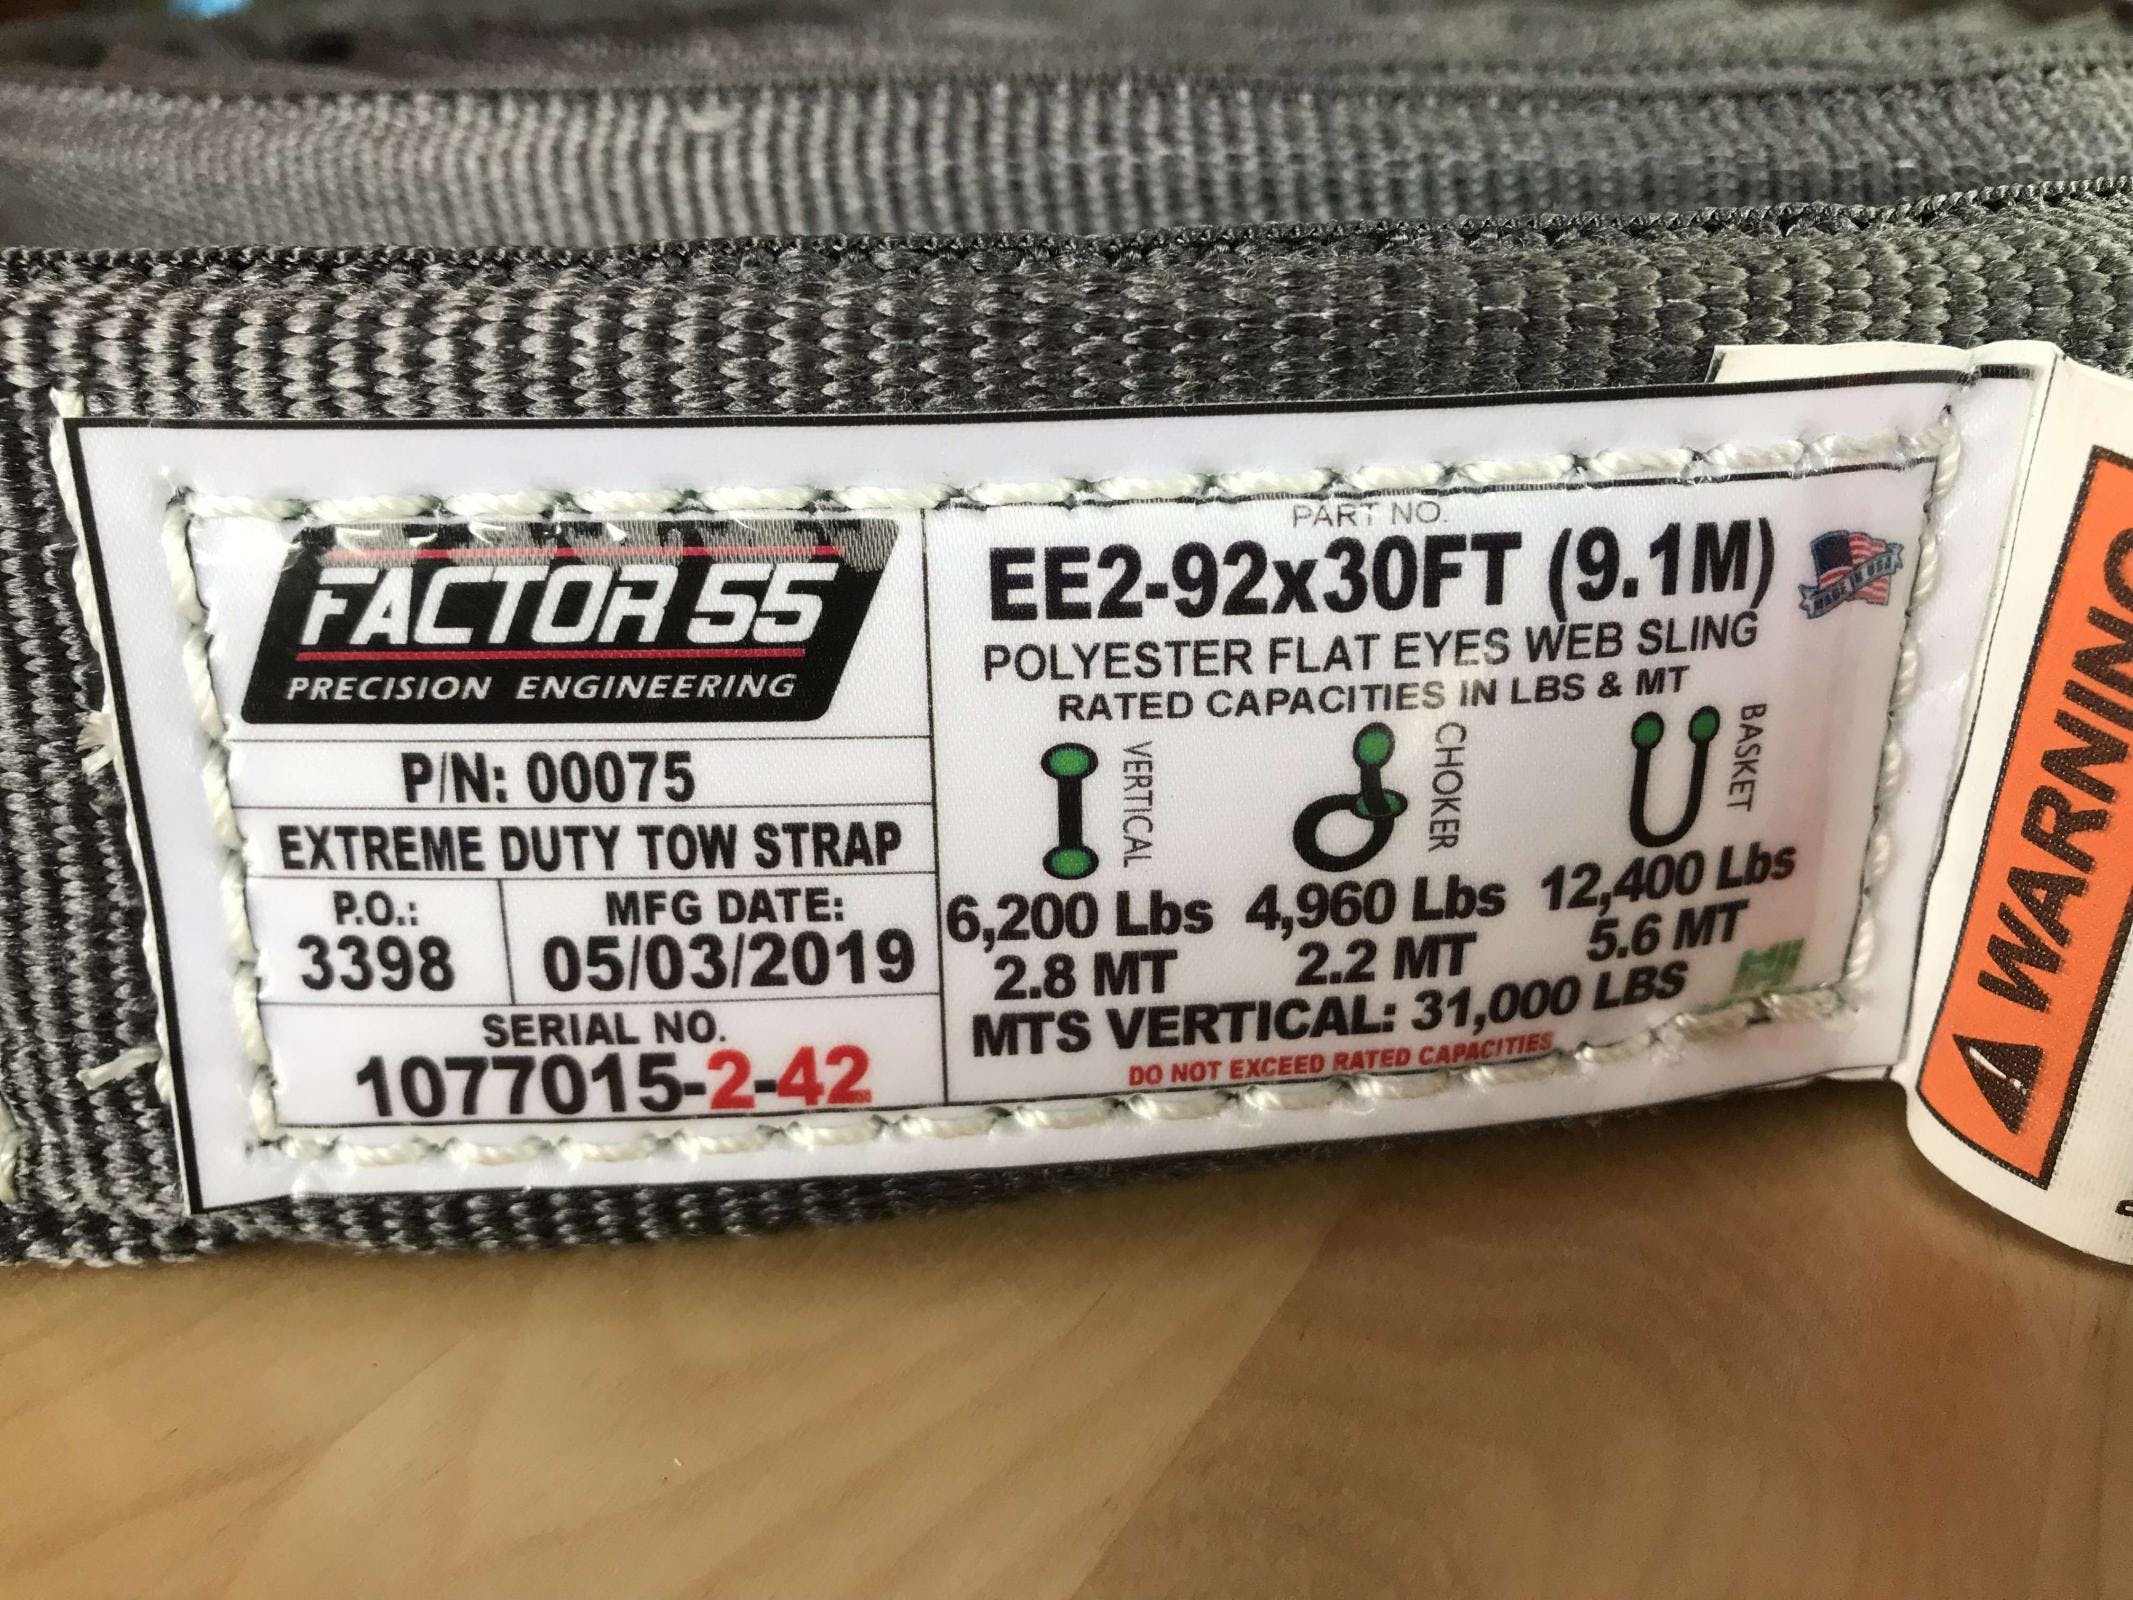 Factor 55 00075 Extreme Duty Tow Strap 30 ft.x 2 in.